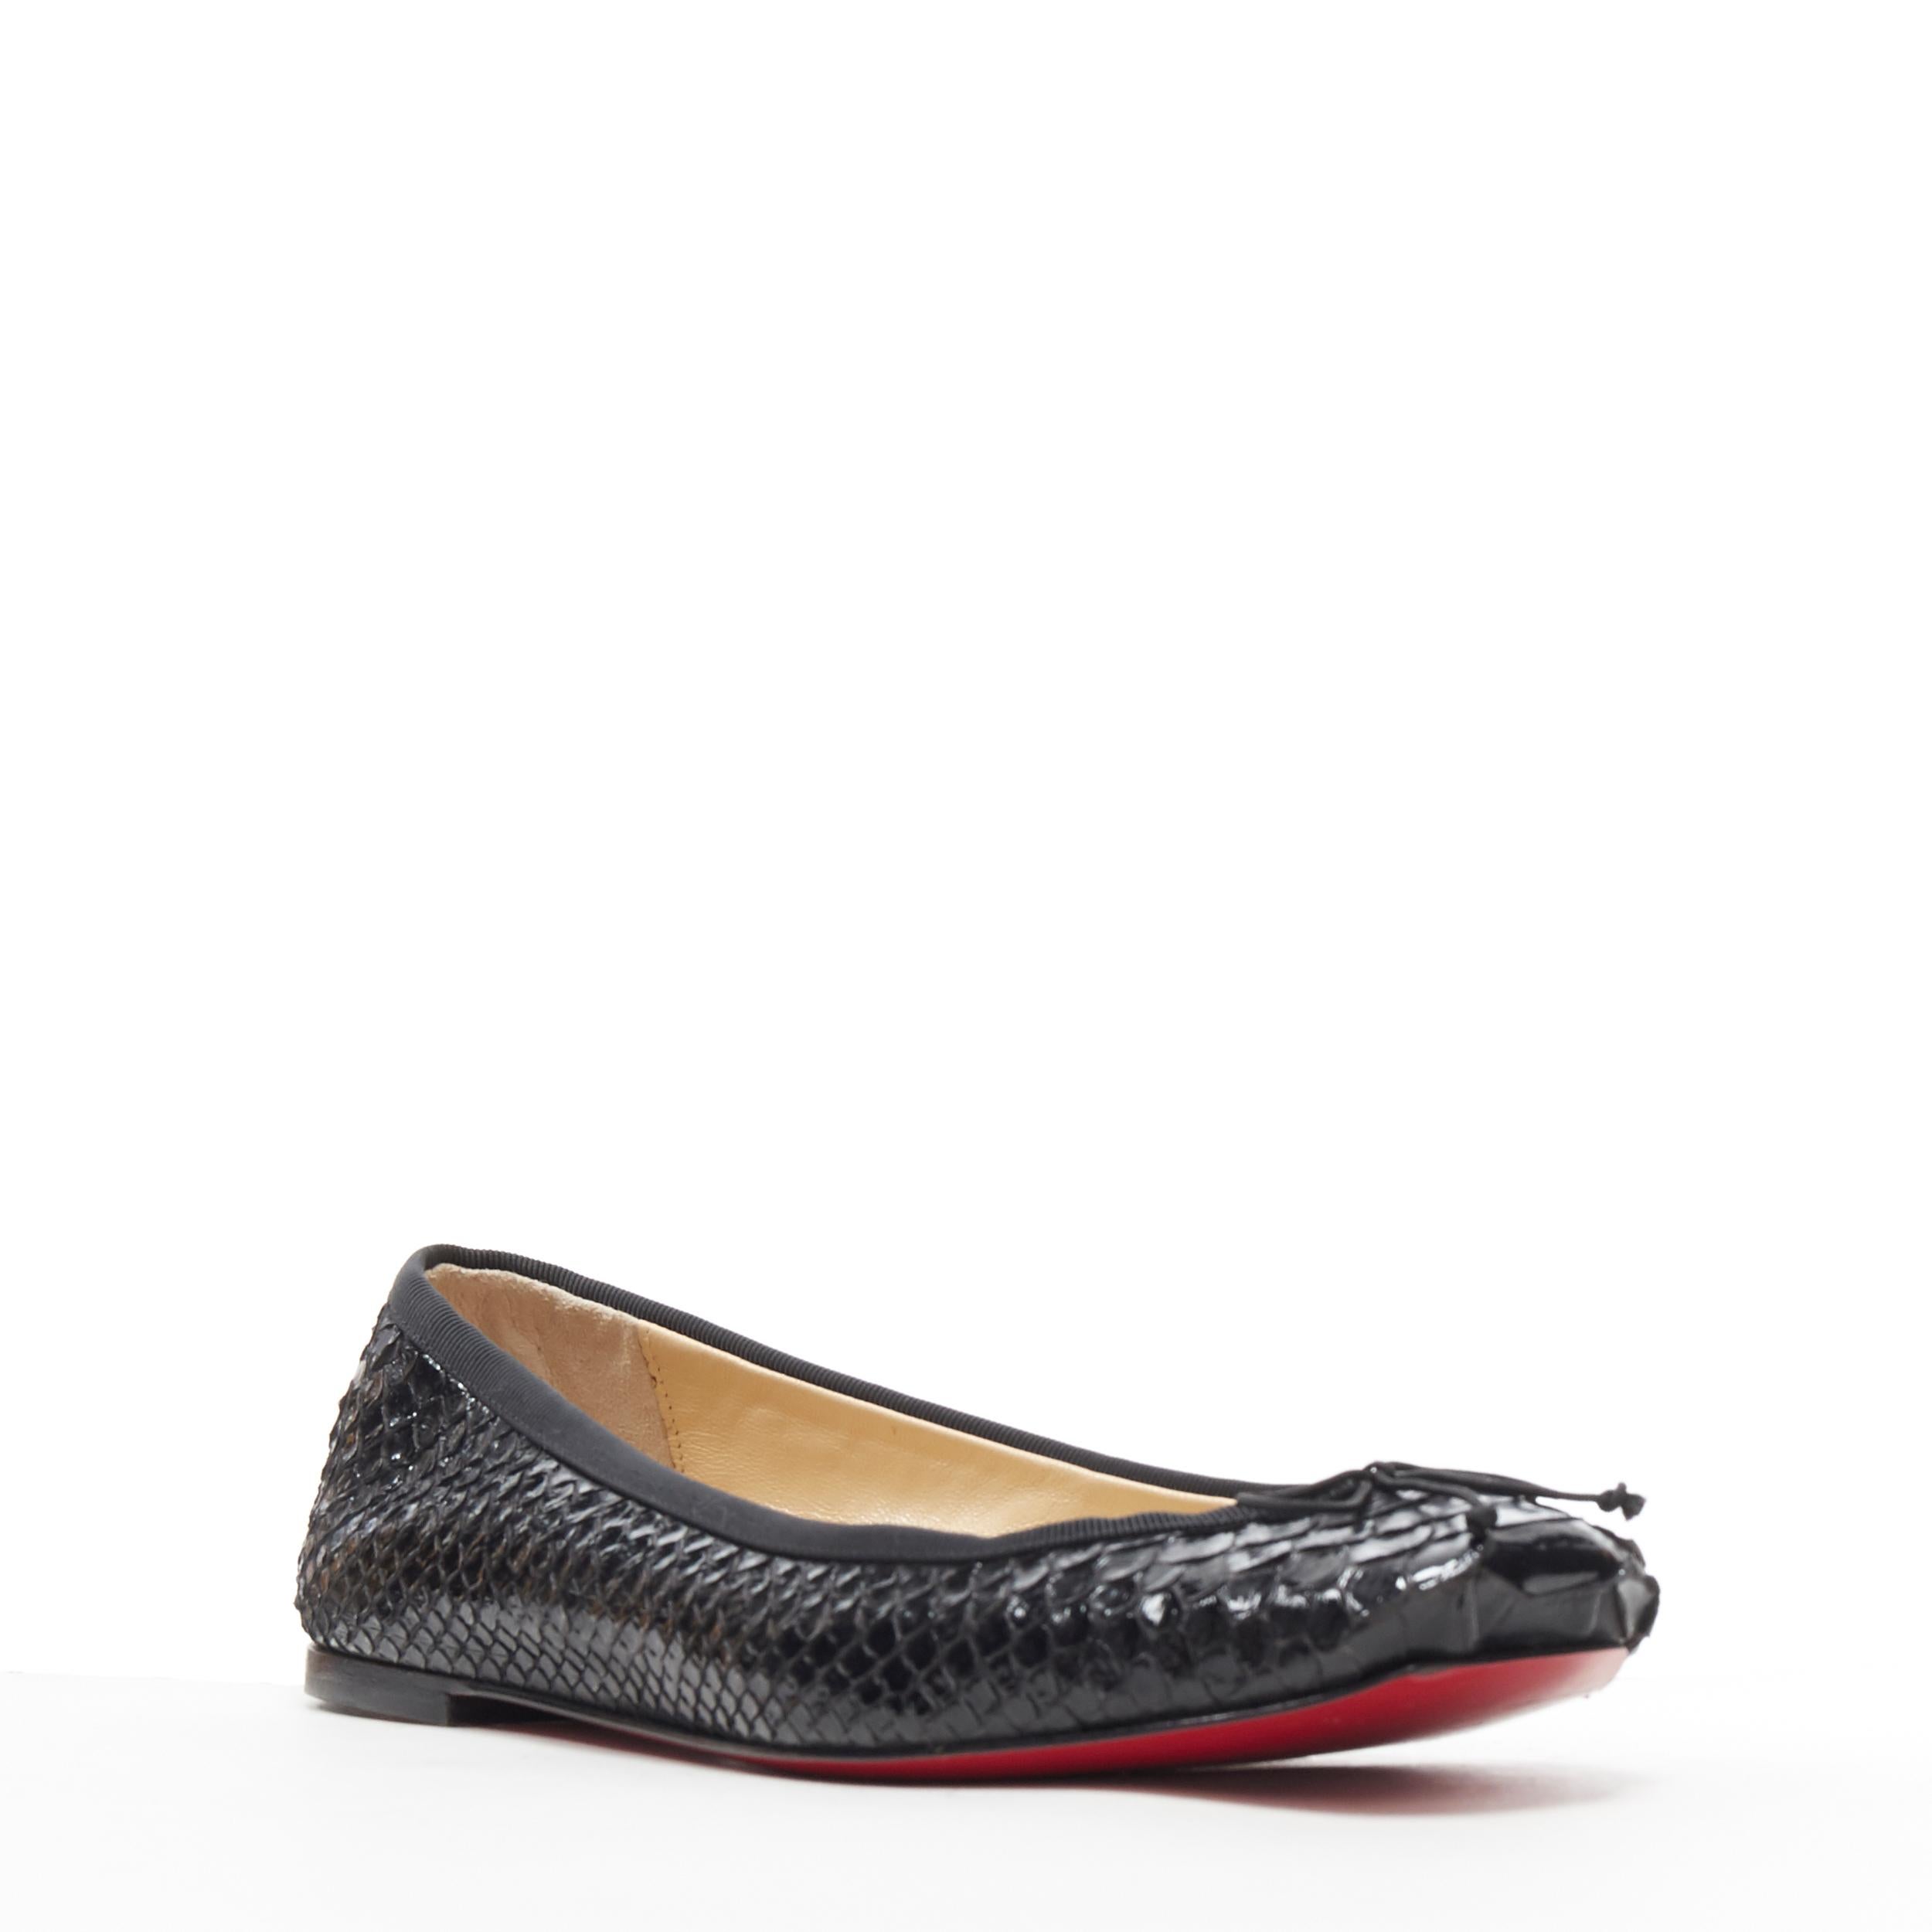 CHRISTIAN LOUBOUTIN Rosella black glossy scaled leather ballerina flats EU35
Brand: Christian Louboutin
Designer: Christian Louboutin
Model Name / Style: Rosella
Material: Leather
Color: Black
Pattern: Solid
Extra Detail: Glossy scaled leather. Bow